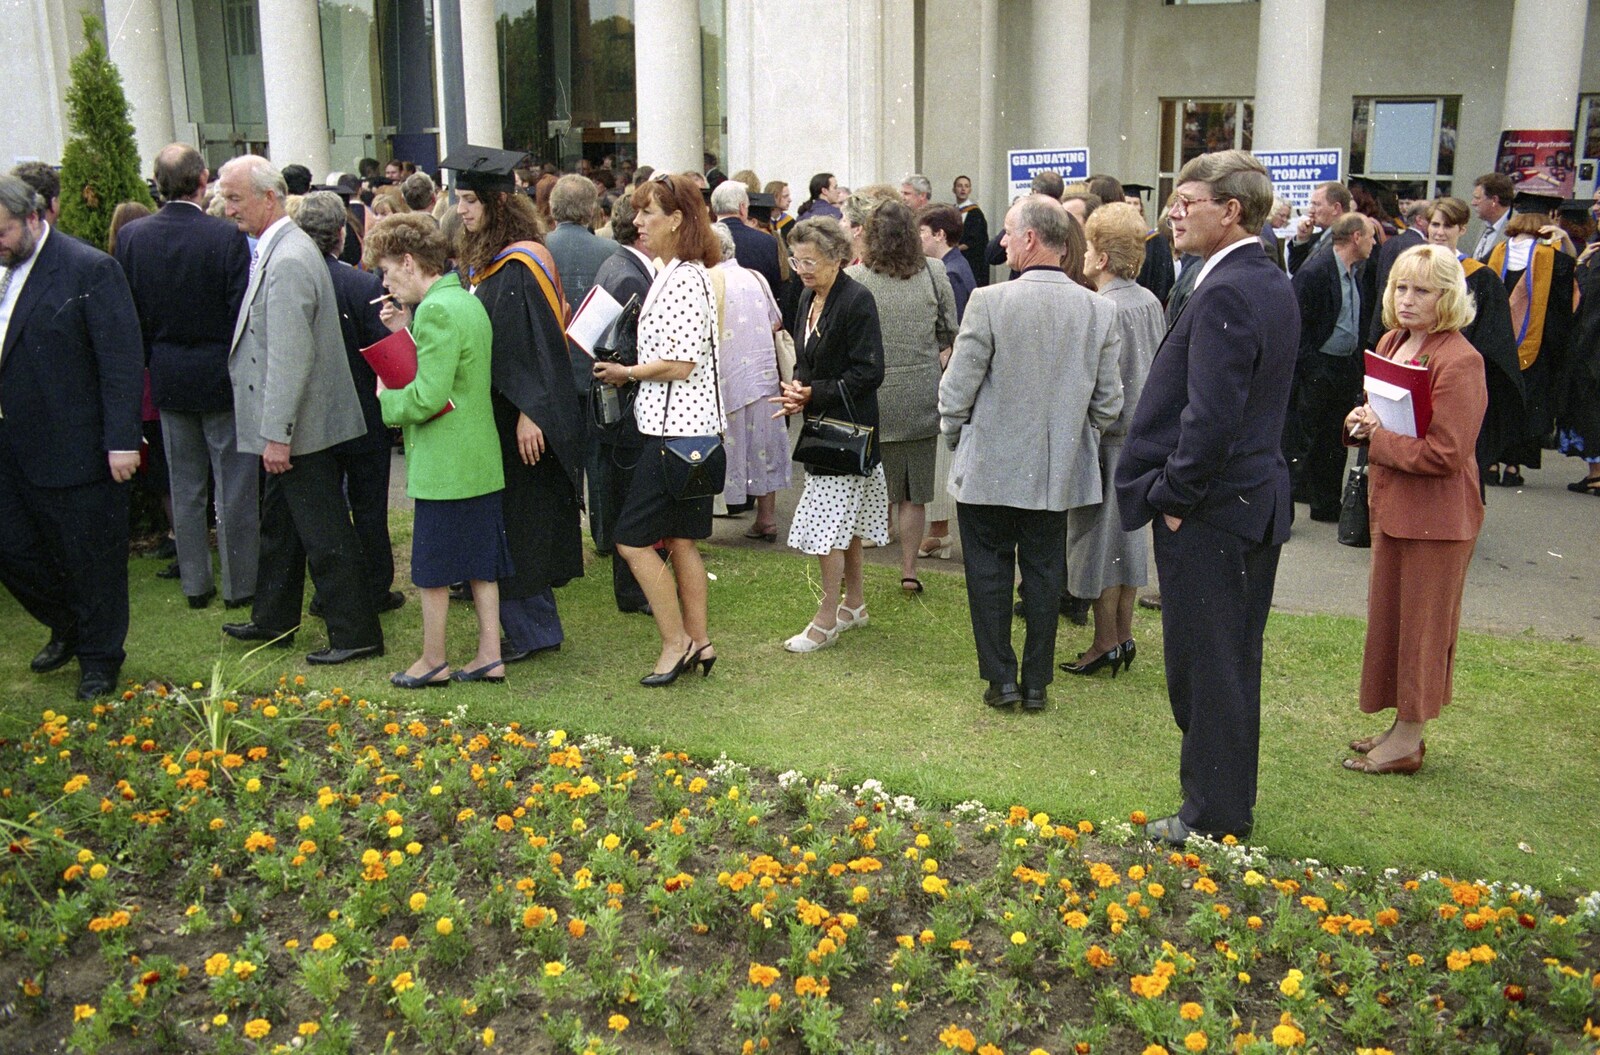 Sis Graduates from De Montfort, Leicester, Leicestershire - 9th August 1997: Milling guests